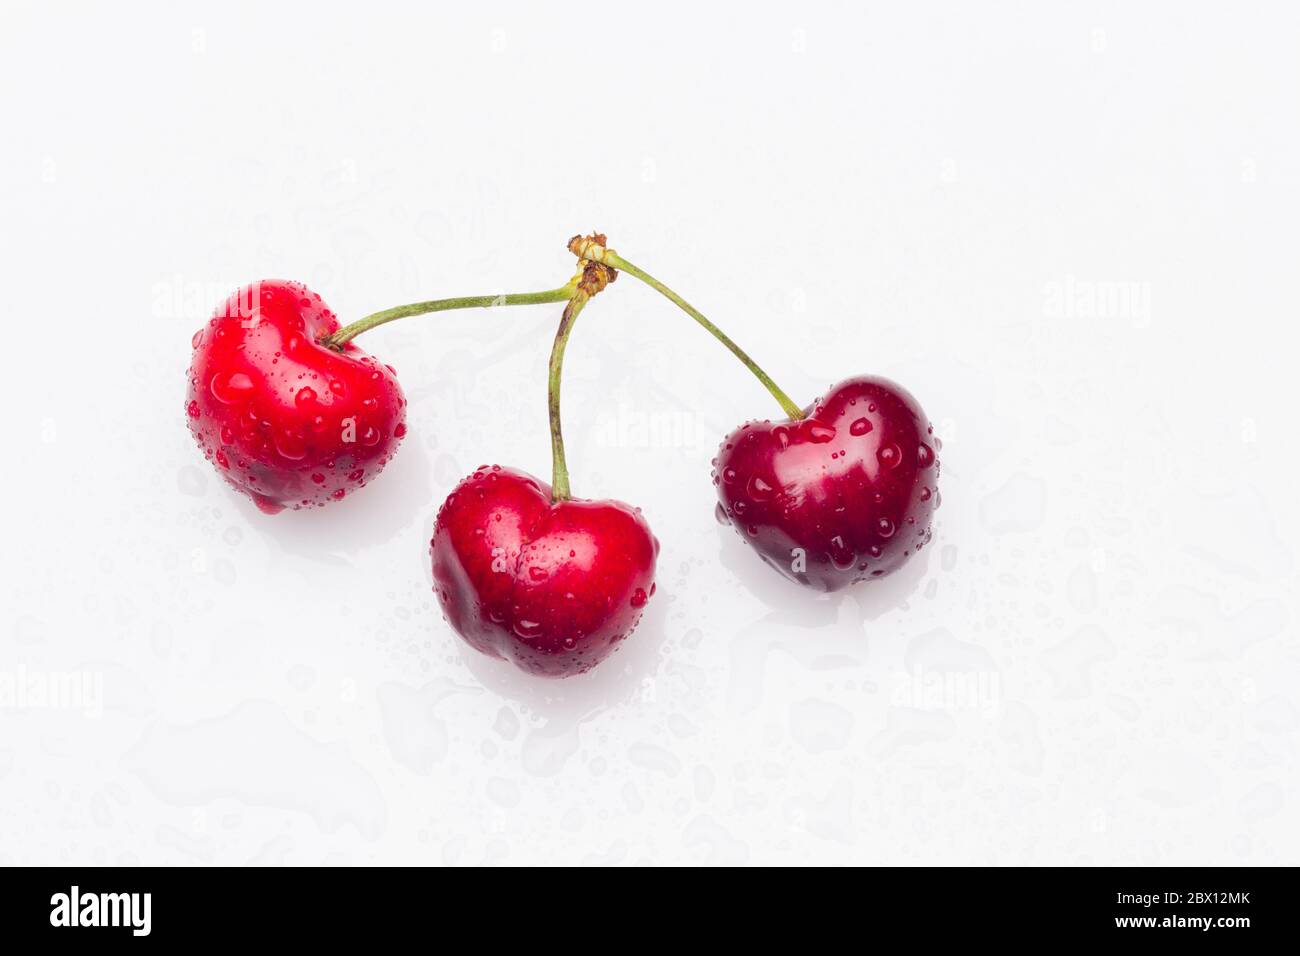 Cherries of cherry red color, almost garnet red, vitamin-rich fruit, eaten raw ideal for desserts of jams, jams, juices. Full of vitamins and very hea Stock Photo